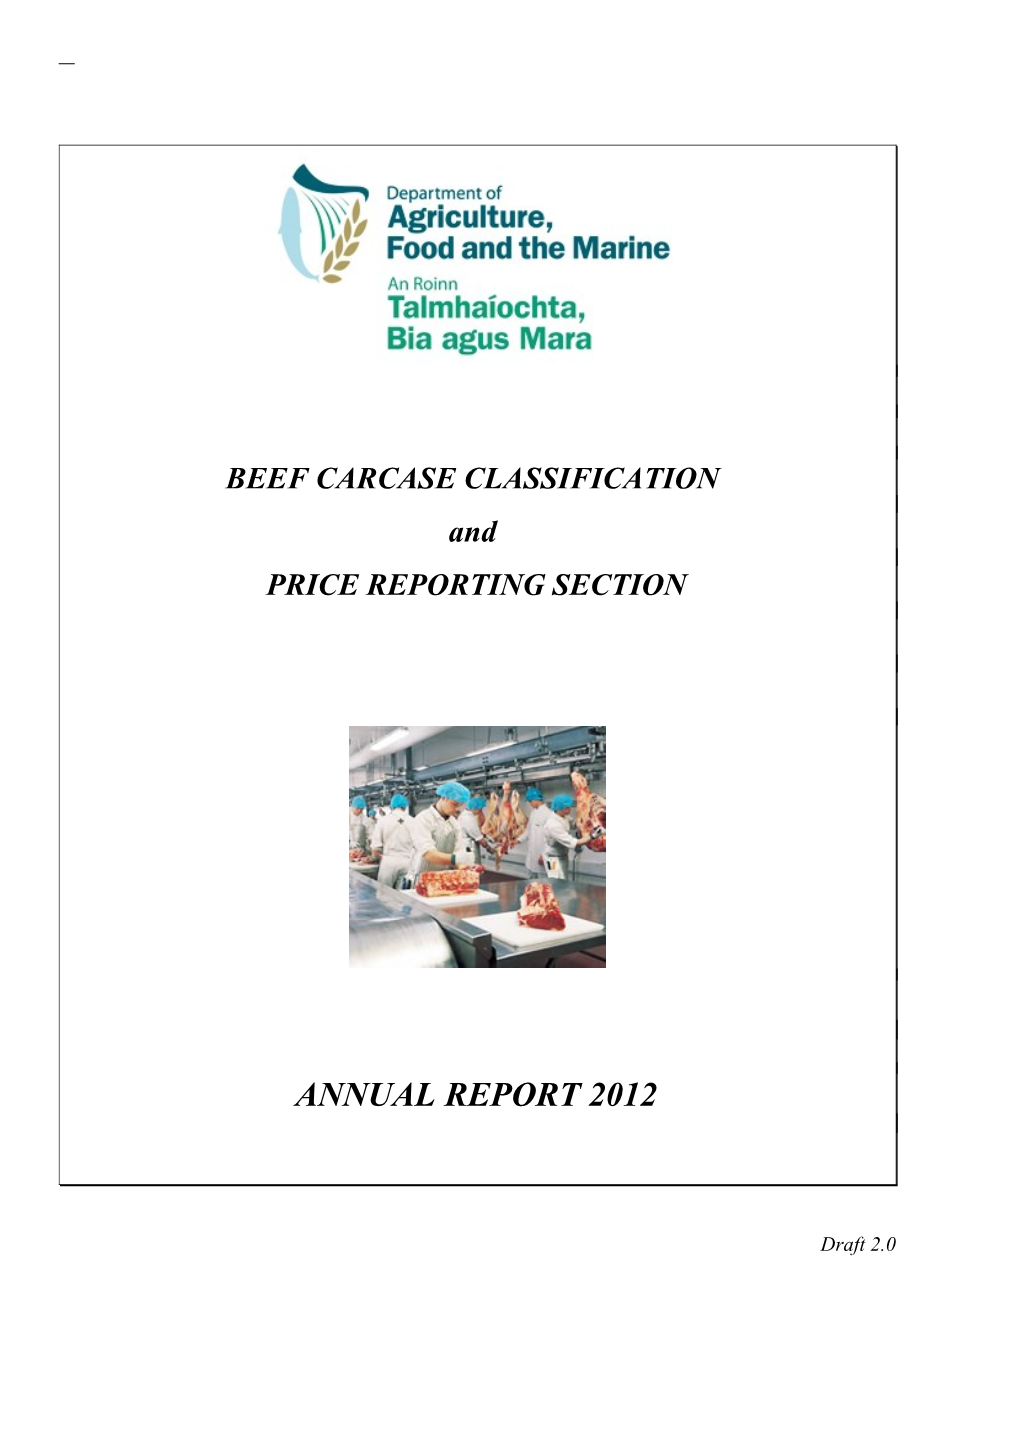 Beef Carcase Classification and Price Reporting - Annual Report 2012